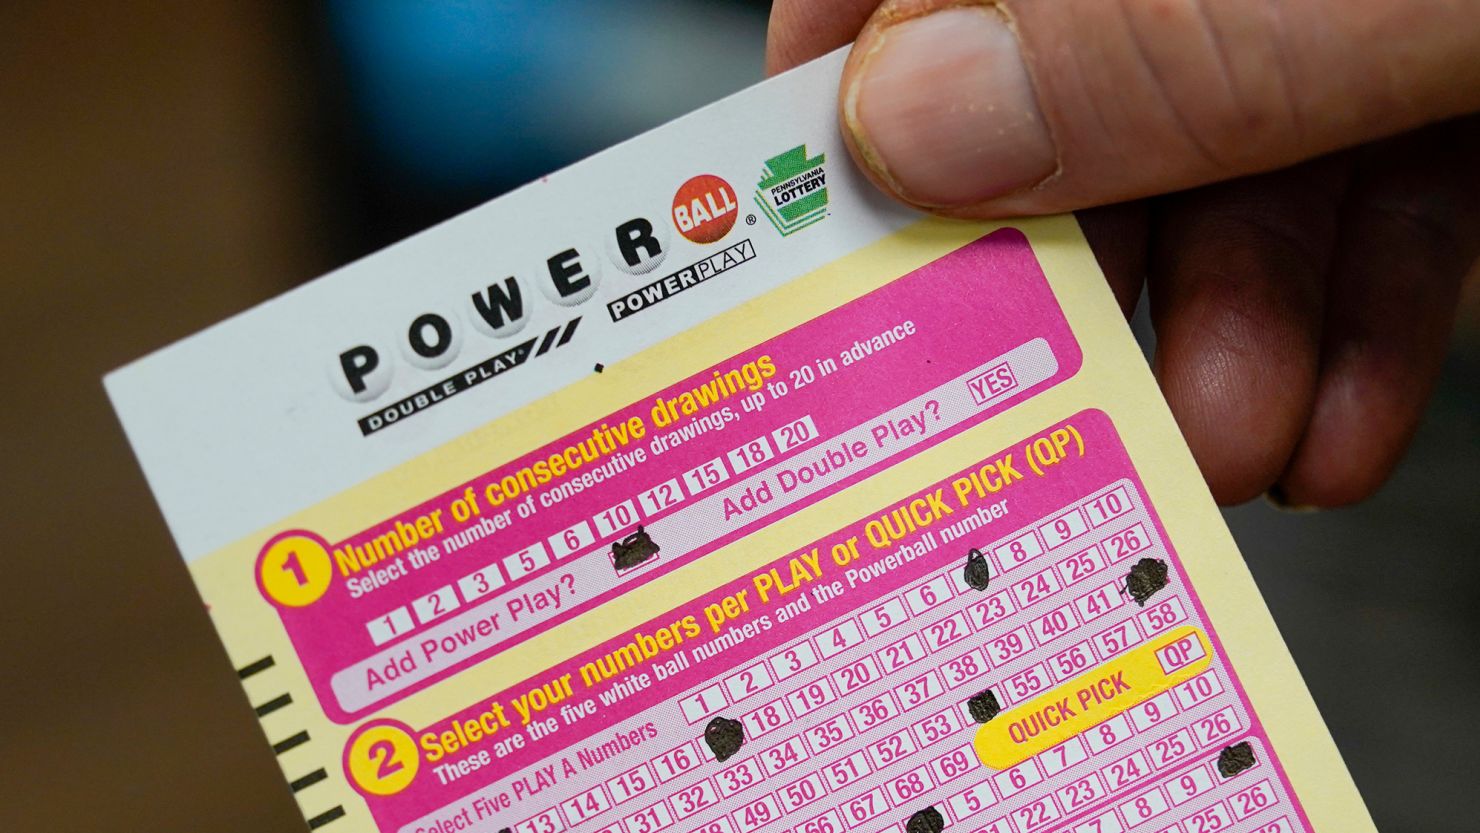 A $747-million lottery jackpot is on the line during the Monday Powerball drawing on February 6, 2023.